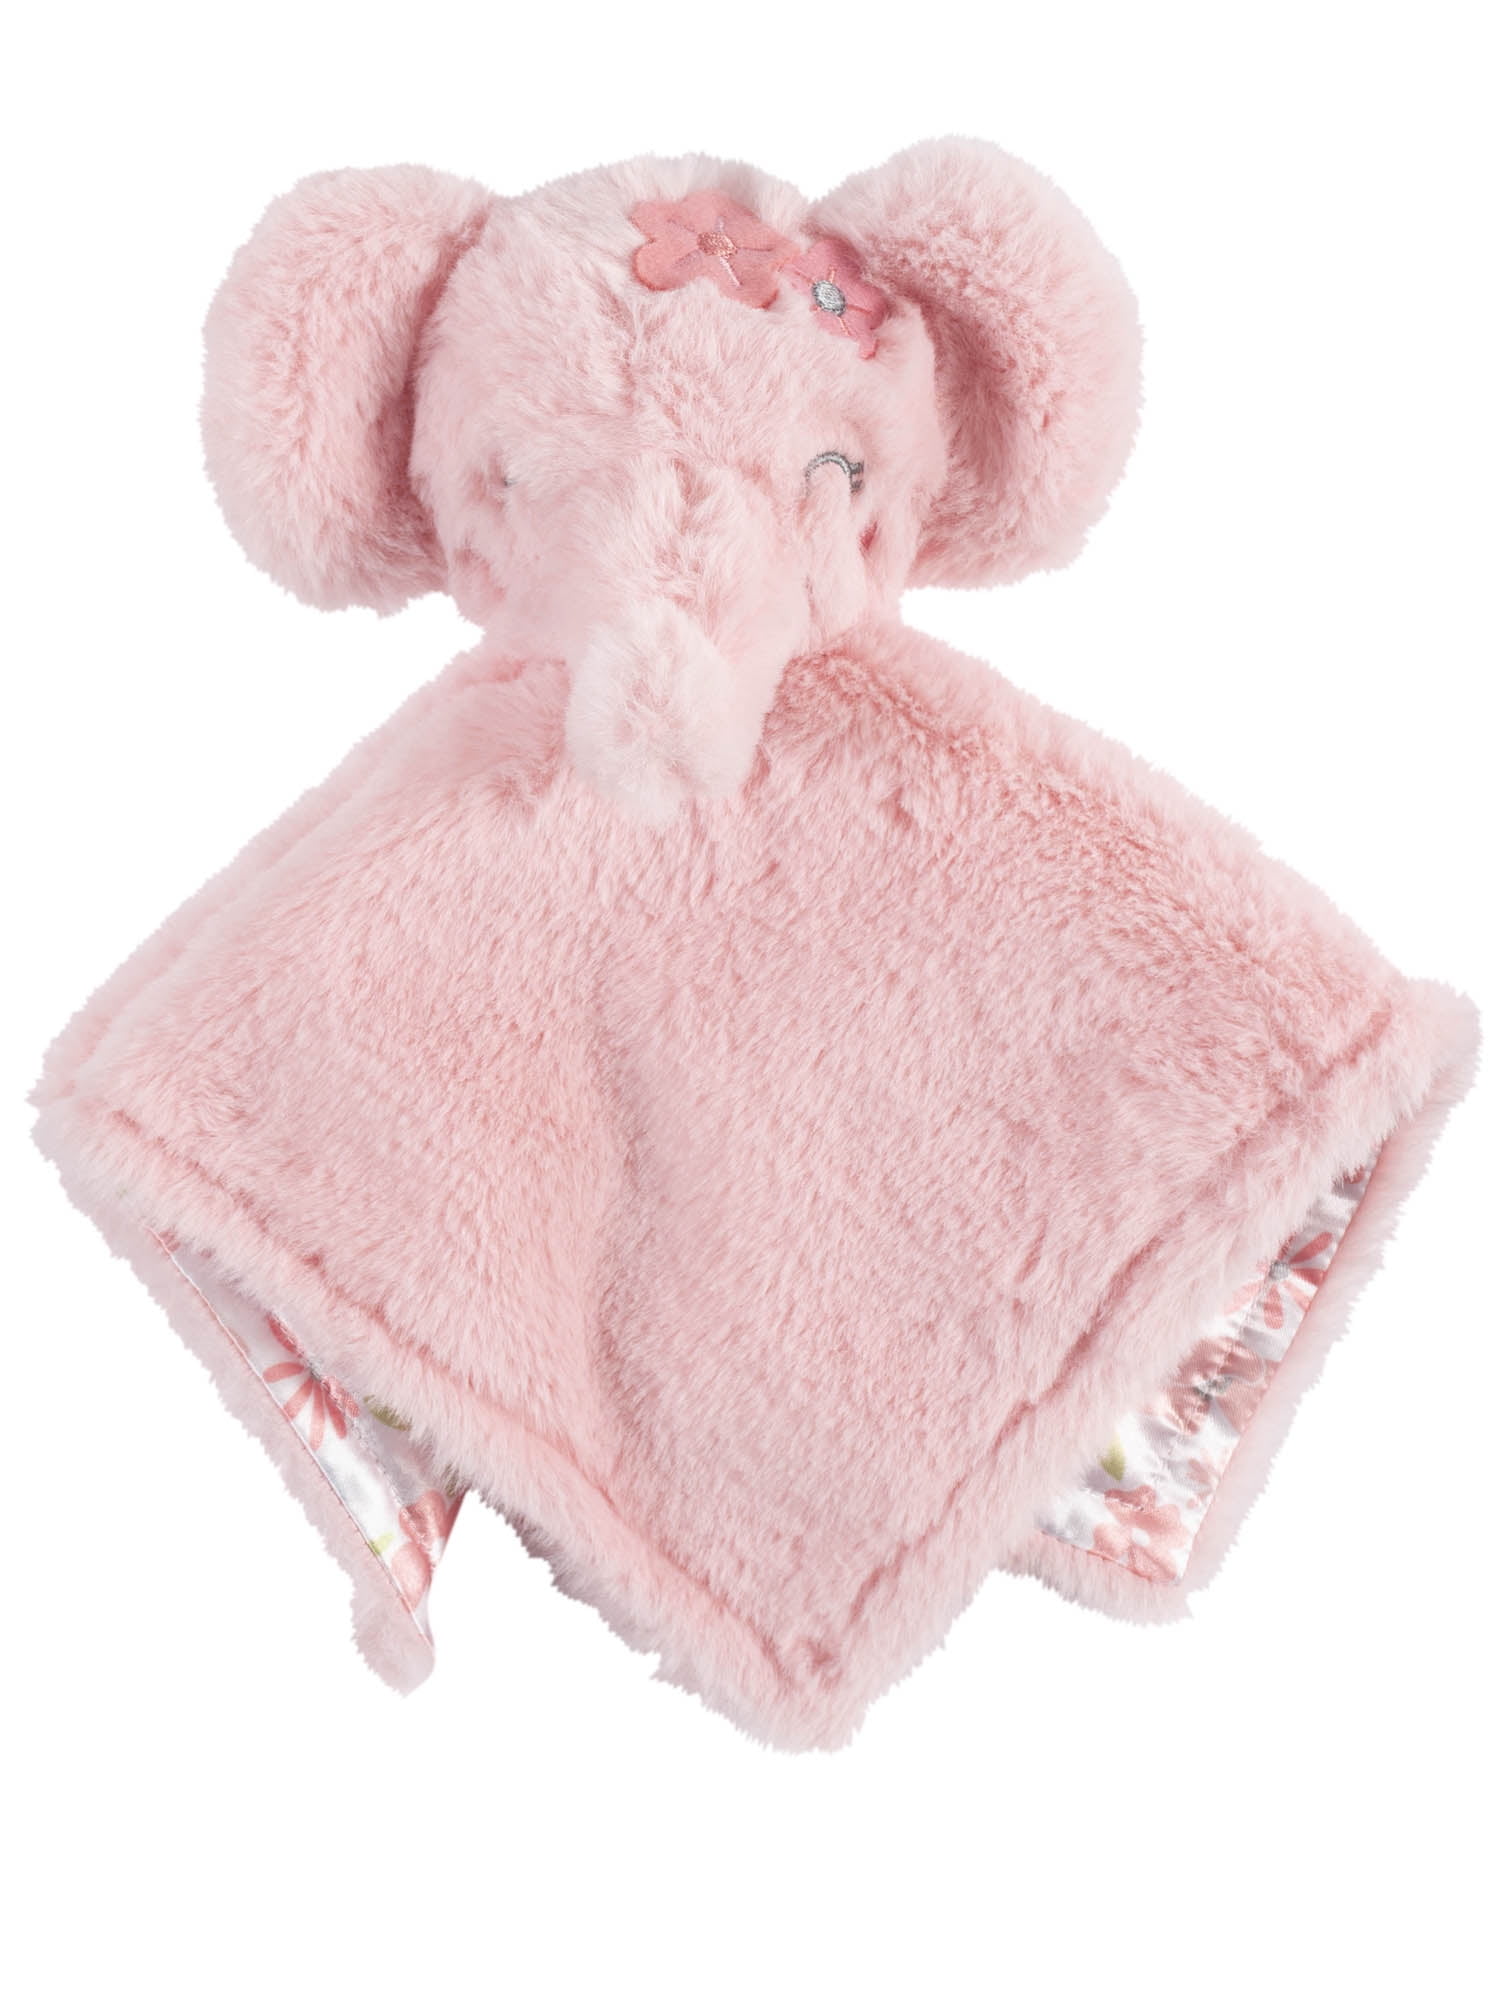 Elephant Baby Girls Boys Security Blanket Throw  Animal Pillow Toy Soft Pink 